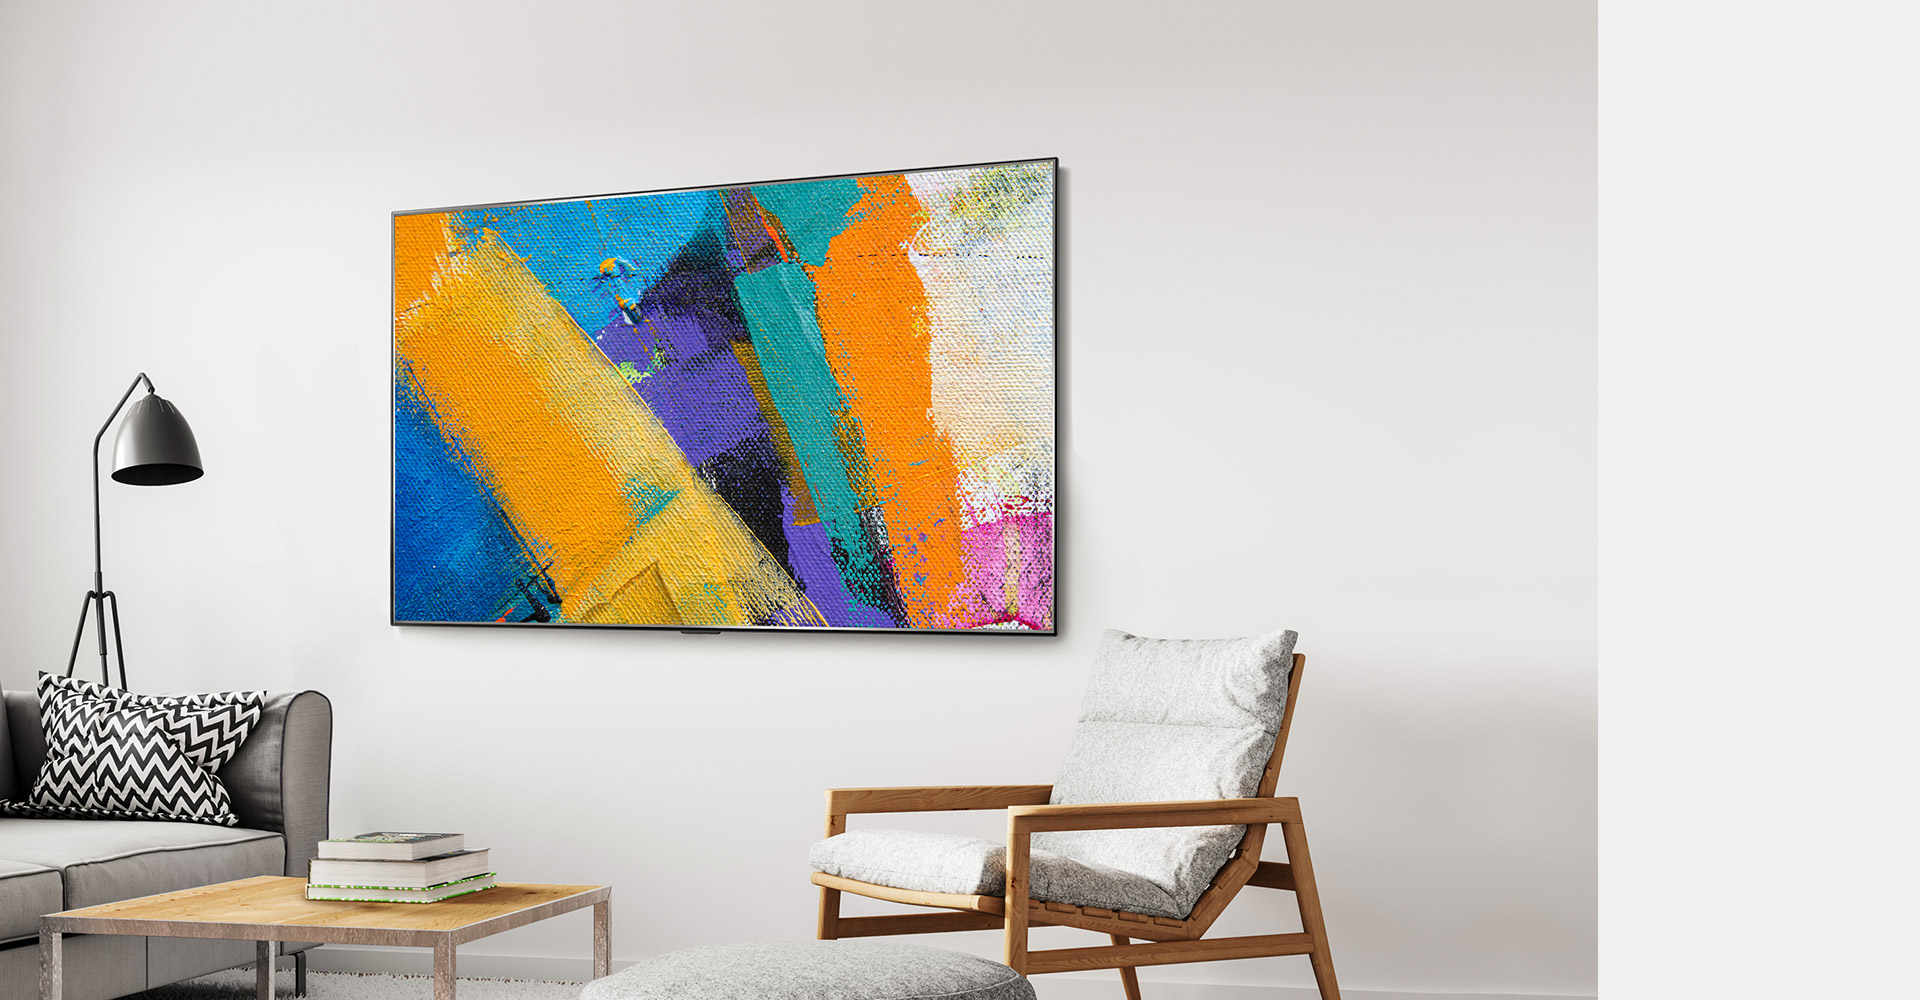 A video showing wall-mounted gallery design TVs showing an artwork (click to watch video)